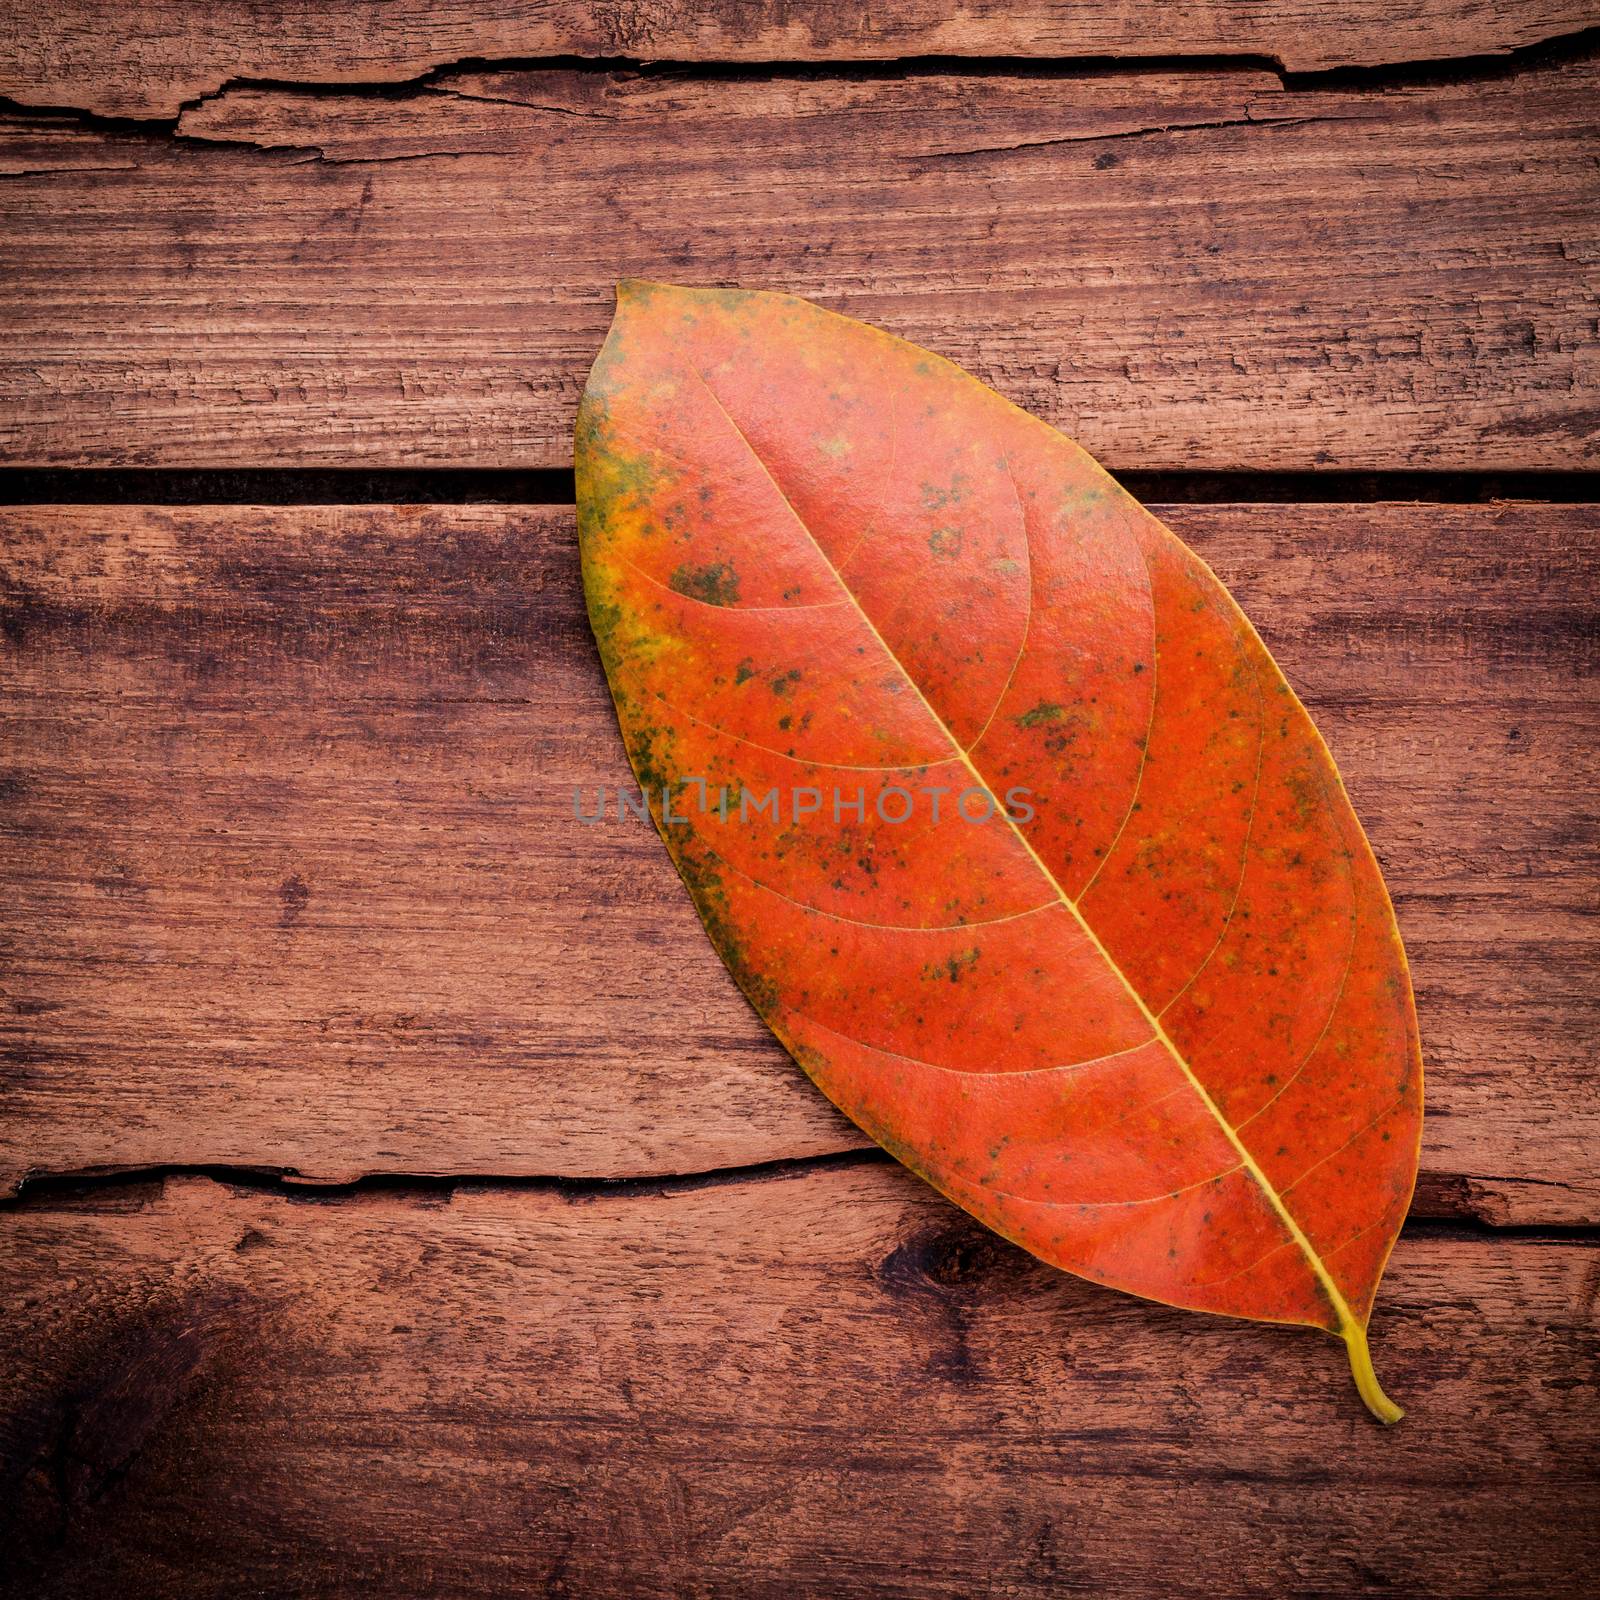 Autumn season and peaceful concepts. Orange leaves falling on rustic wooden background .